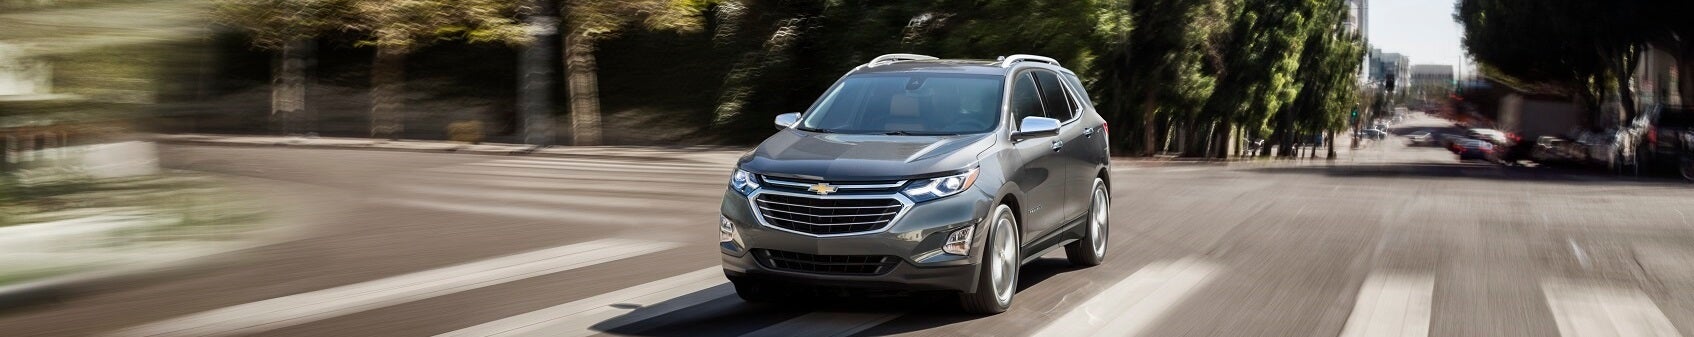 2021 Chevy Equinox Safety Ratings